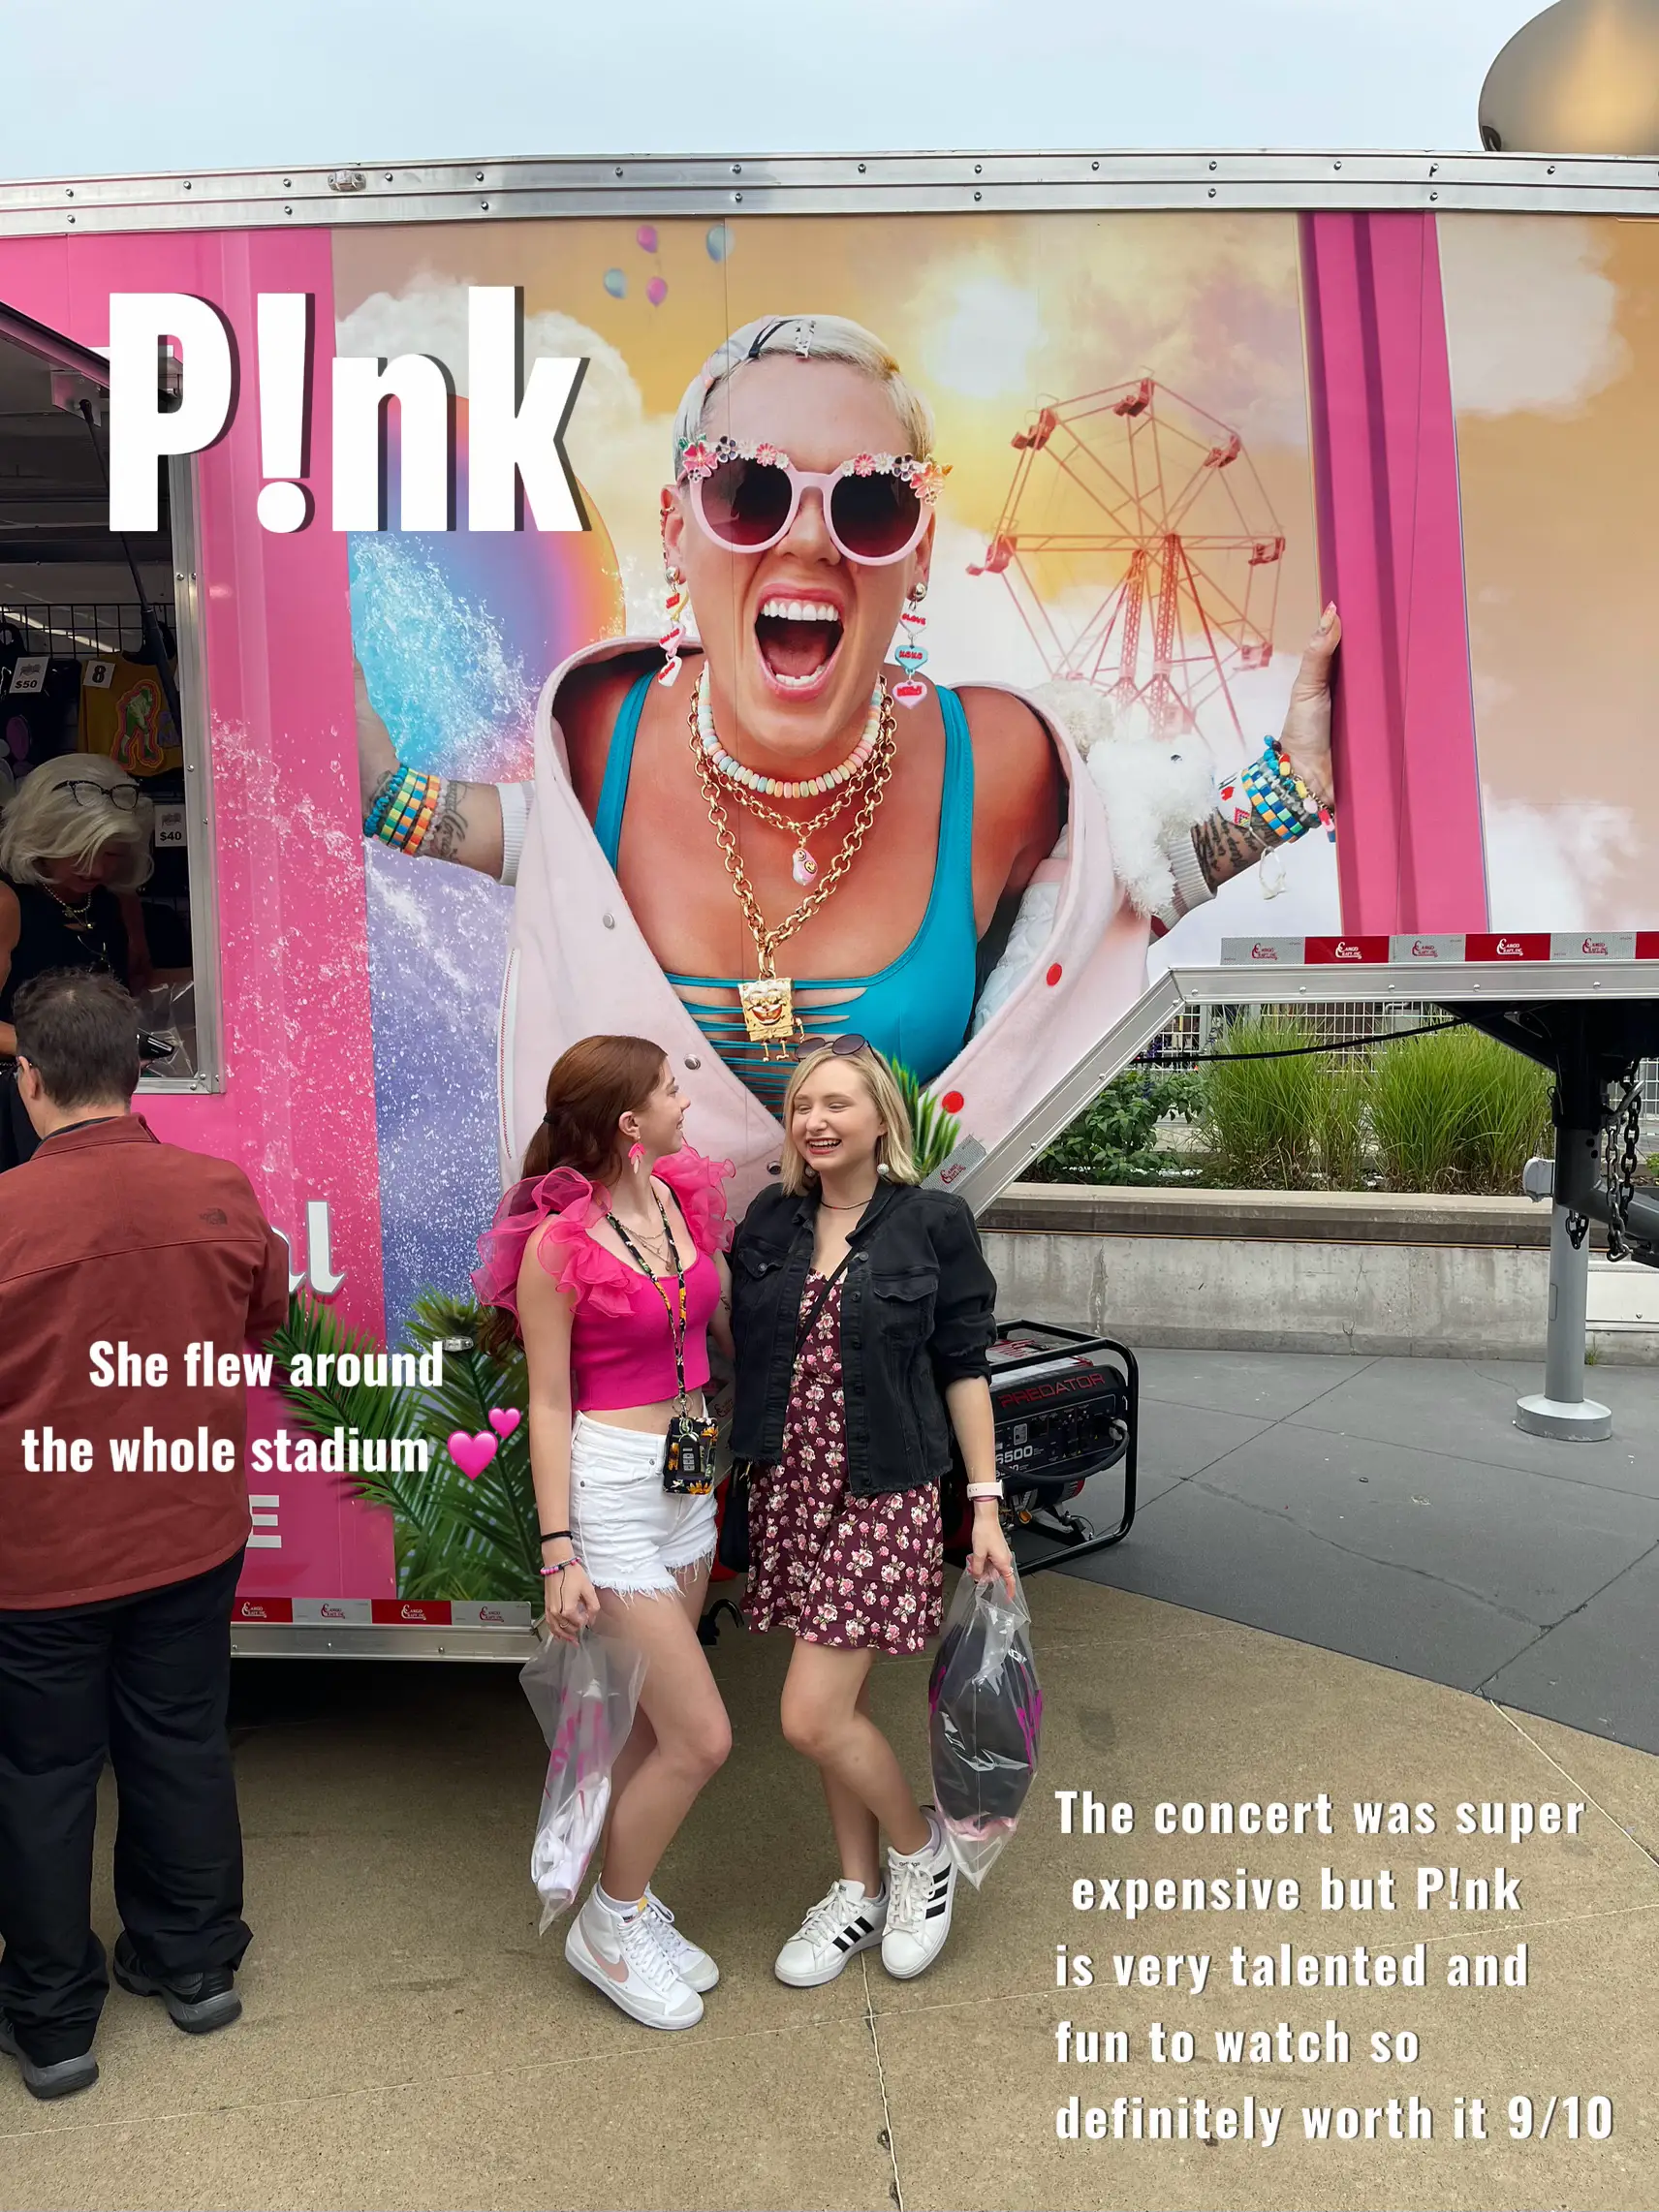  Two women are standing in front of a pink trailer with a picture of P!nk on it. They are posing for a picture and there is a sign that says "P!